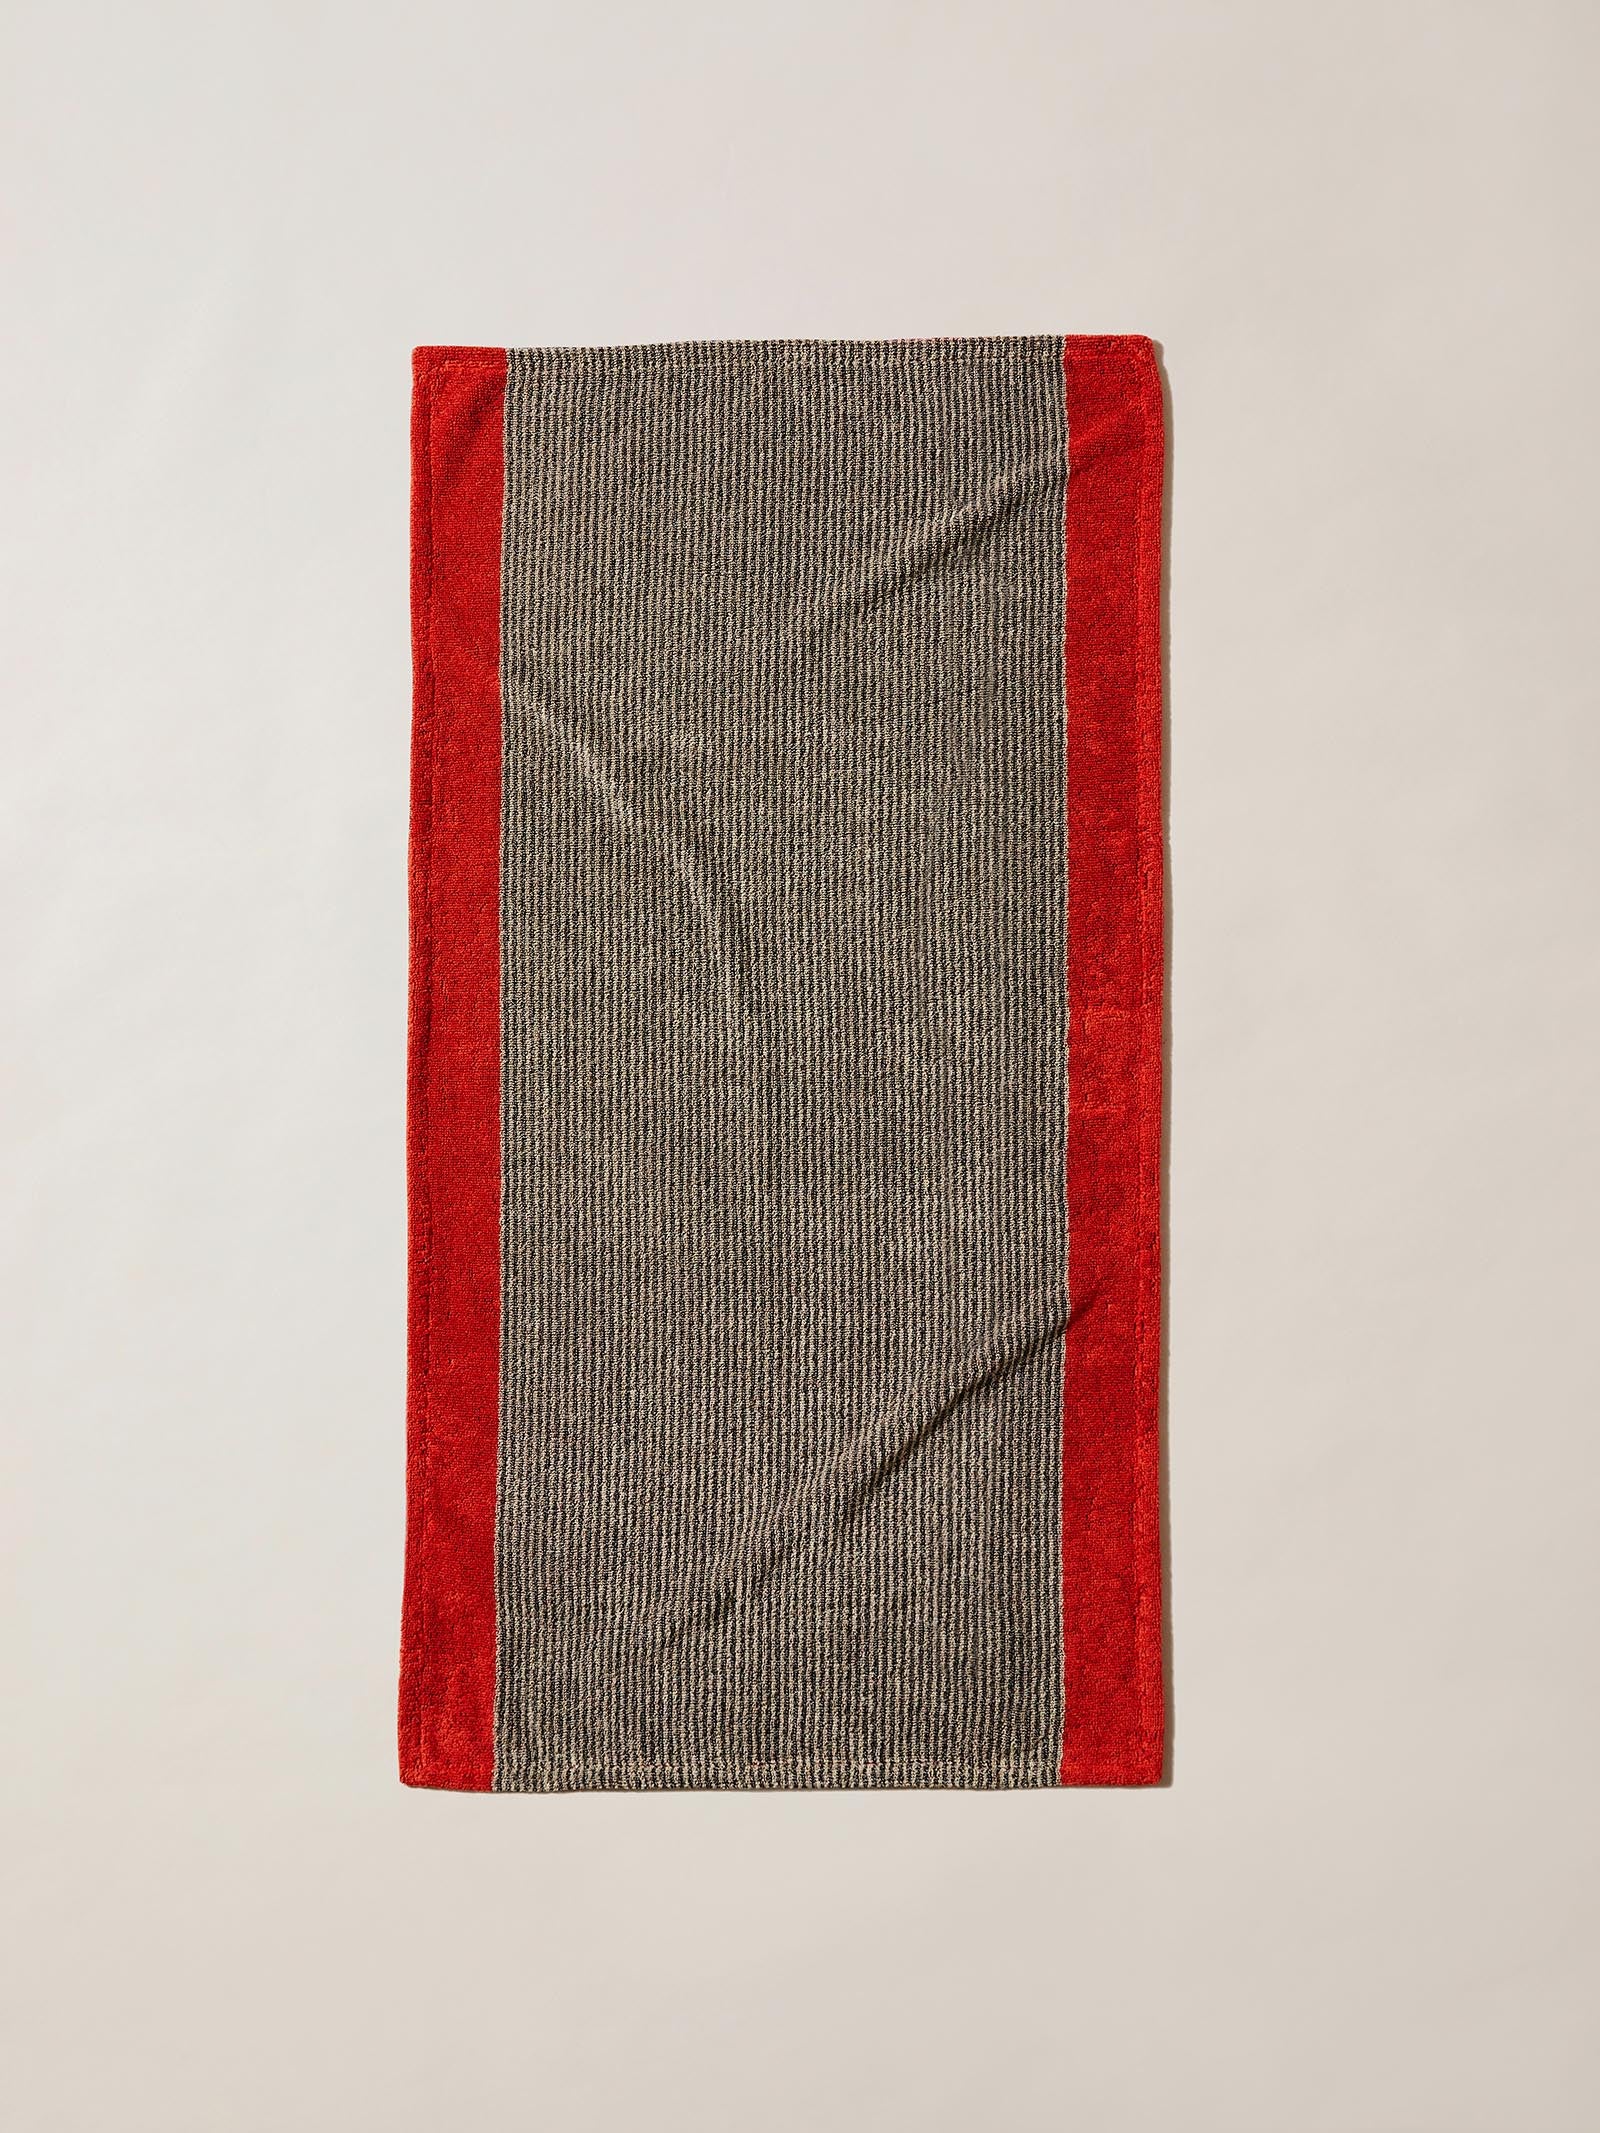 Small Towel - Smoke and Terra Red